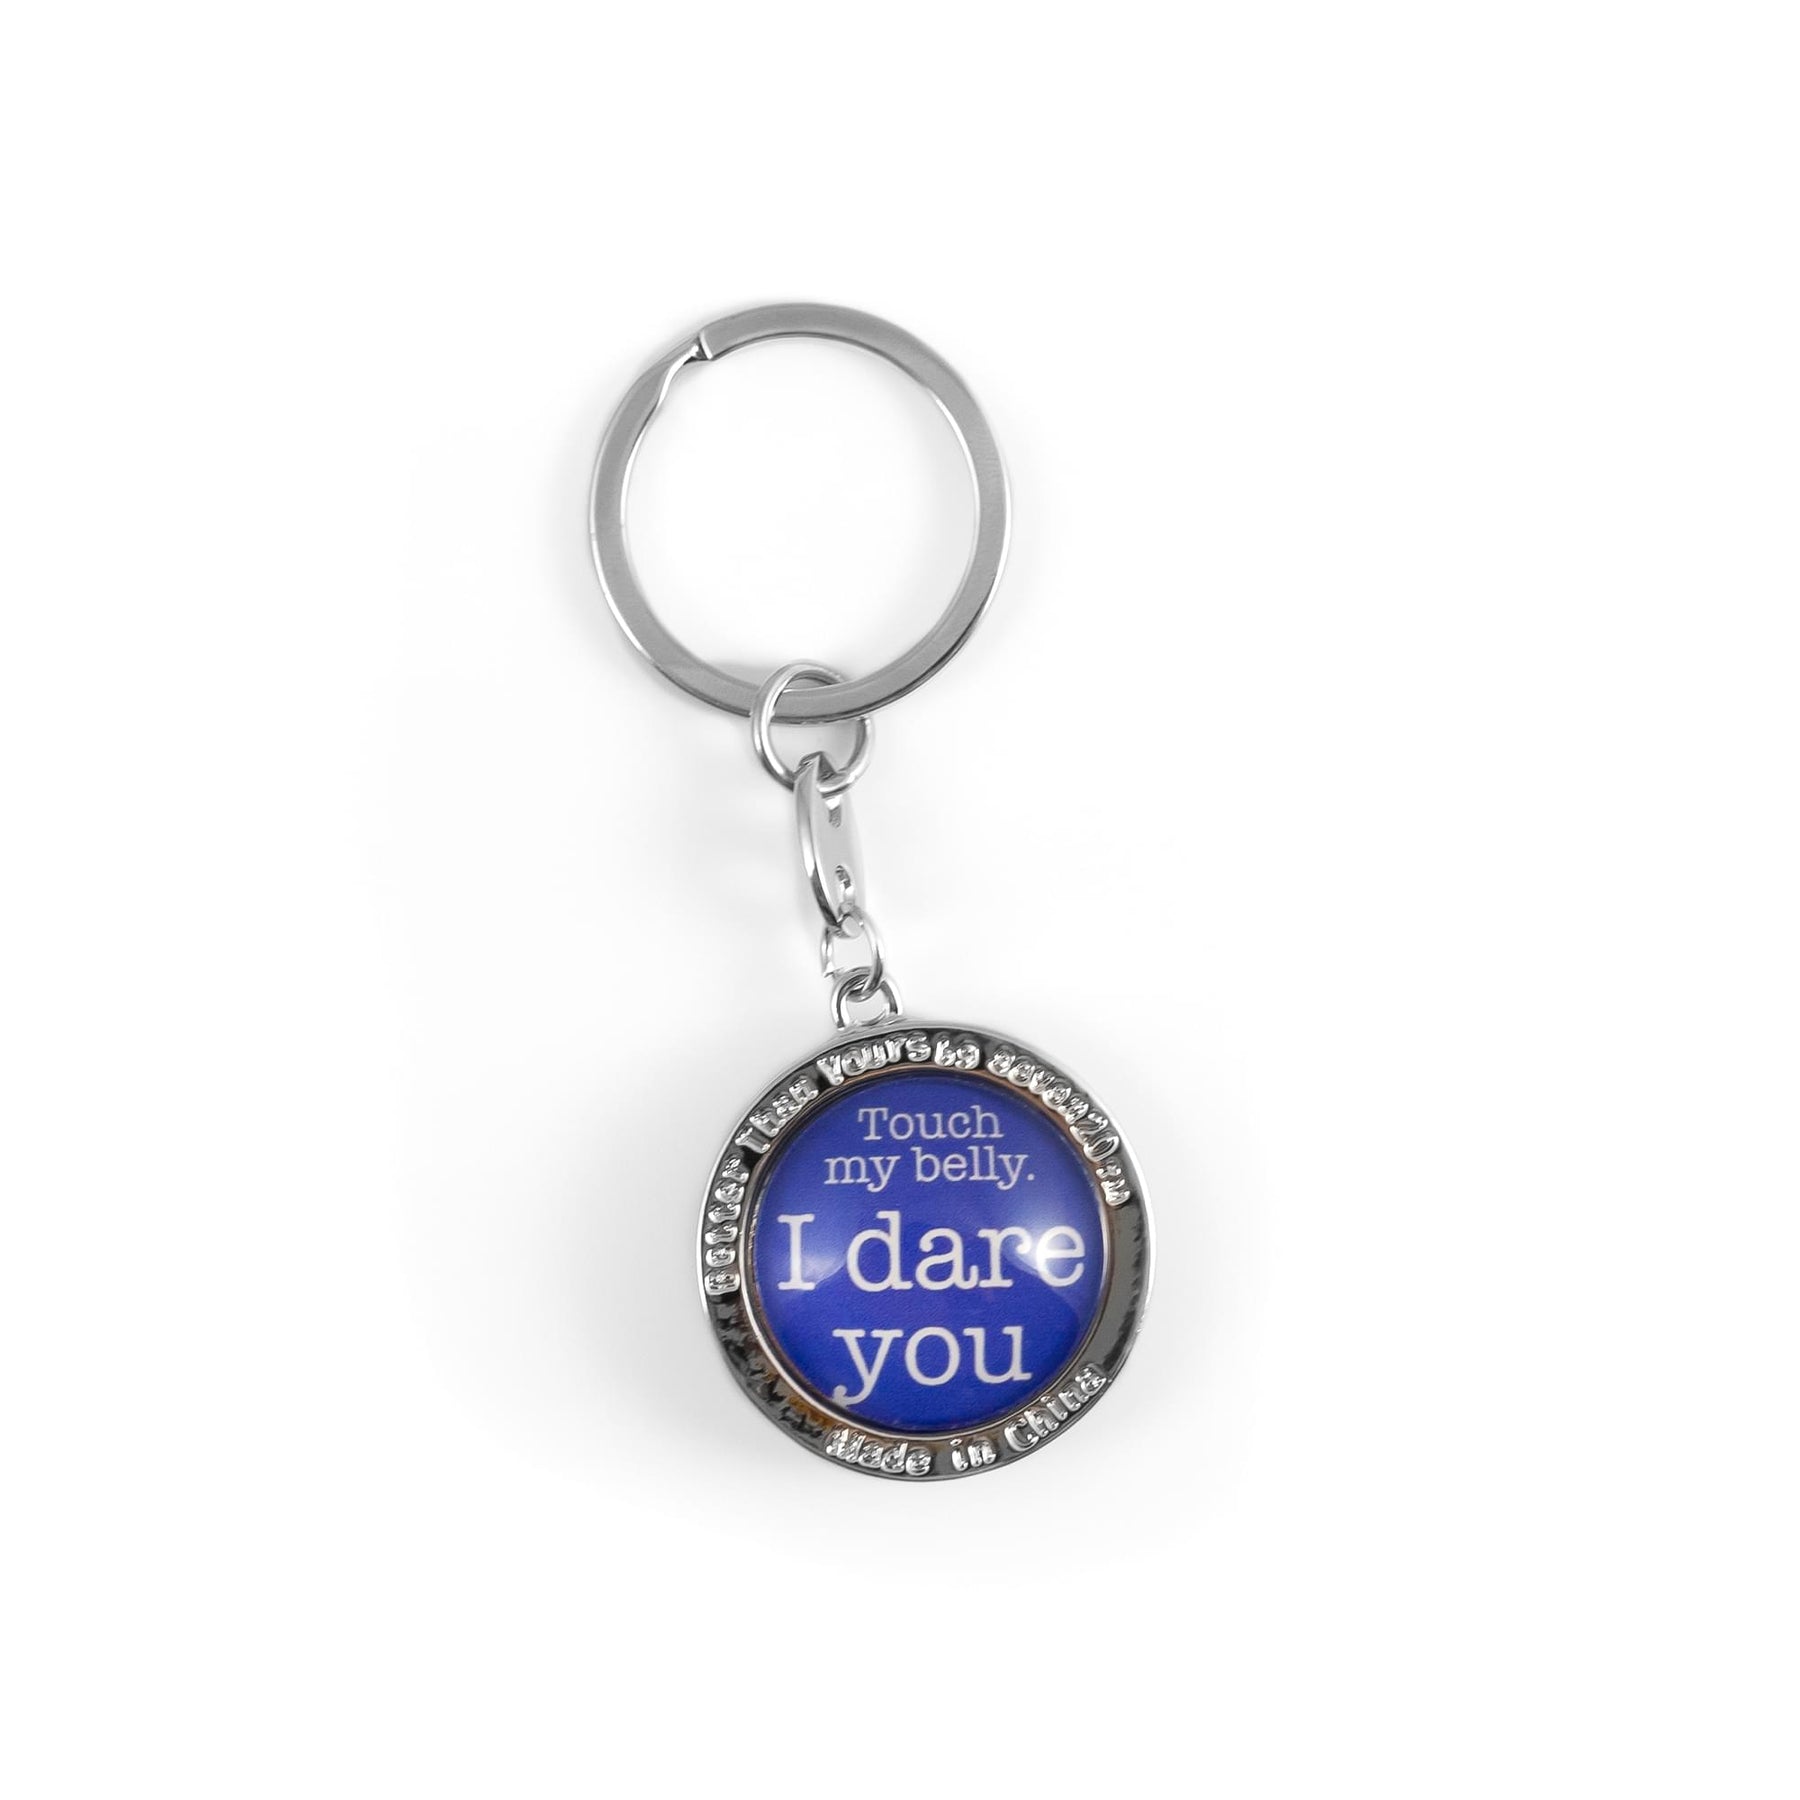 Cat Key Ring Accessory | Multi-Purpose Key Chain | Perfect For Cat Lovers